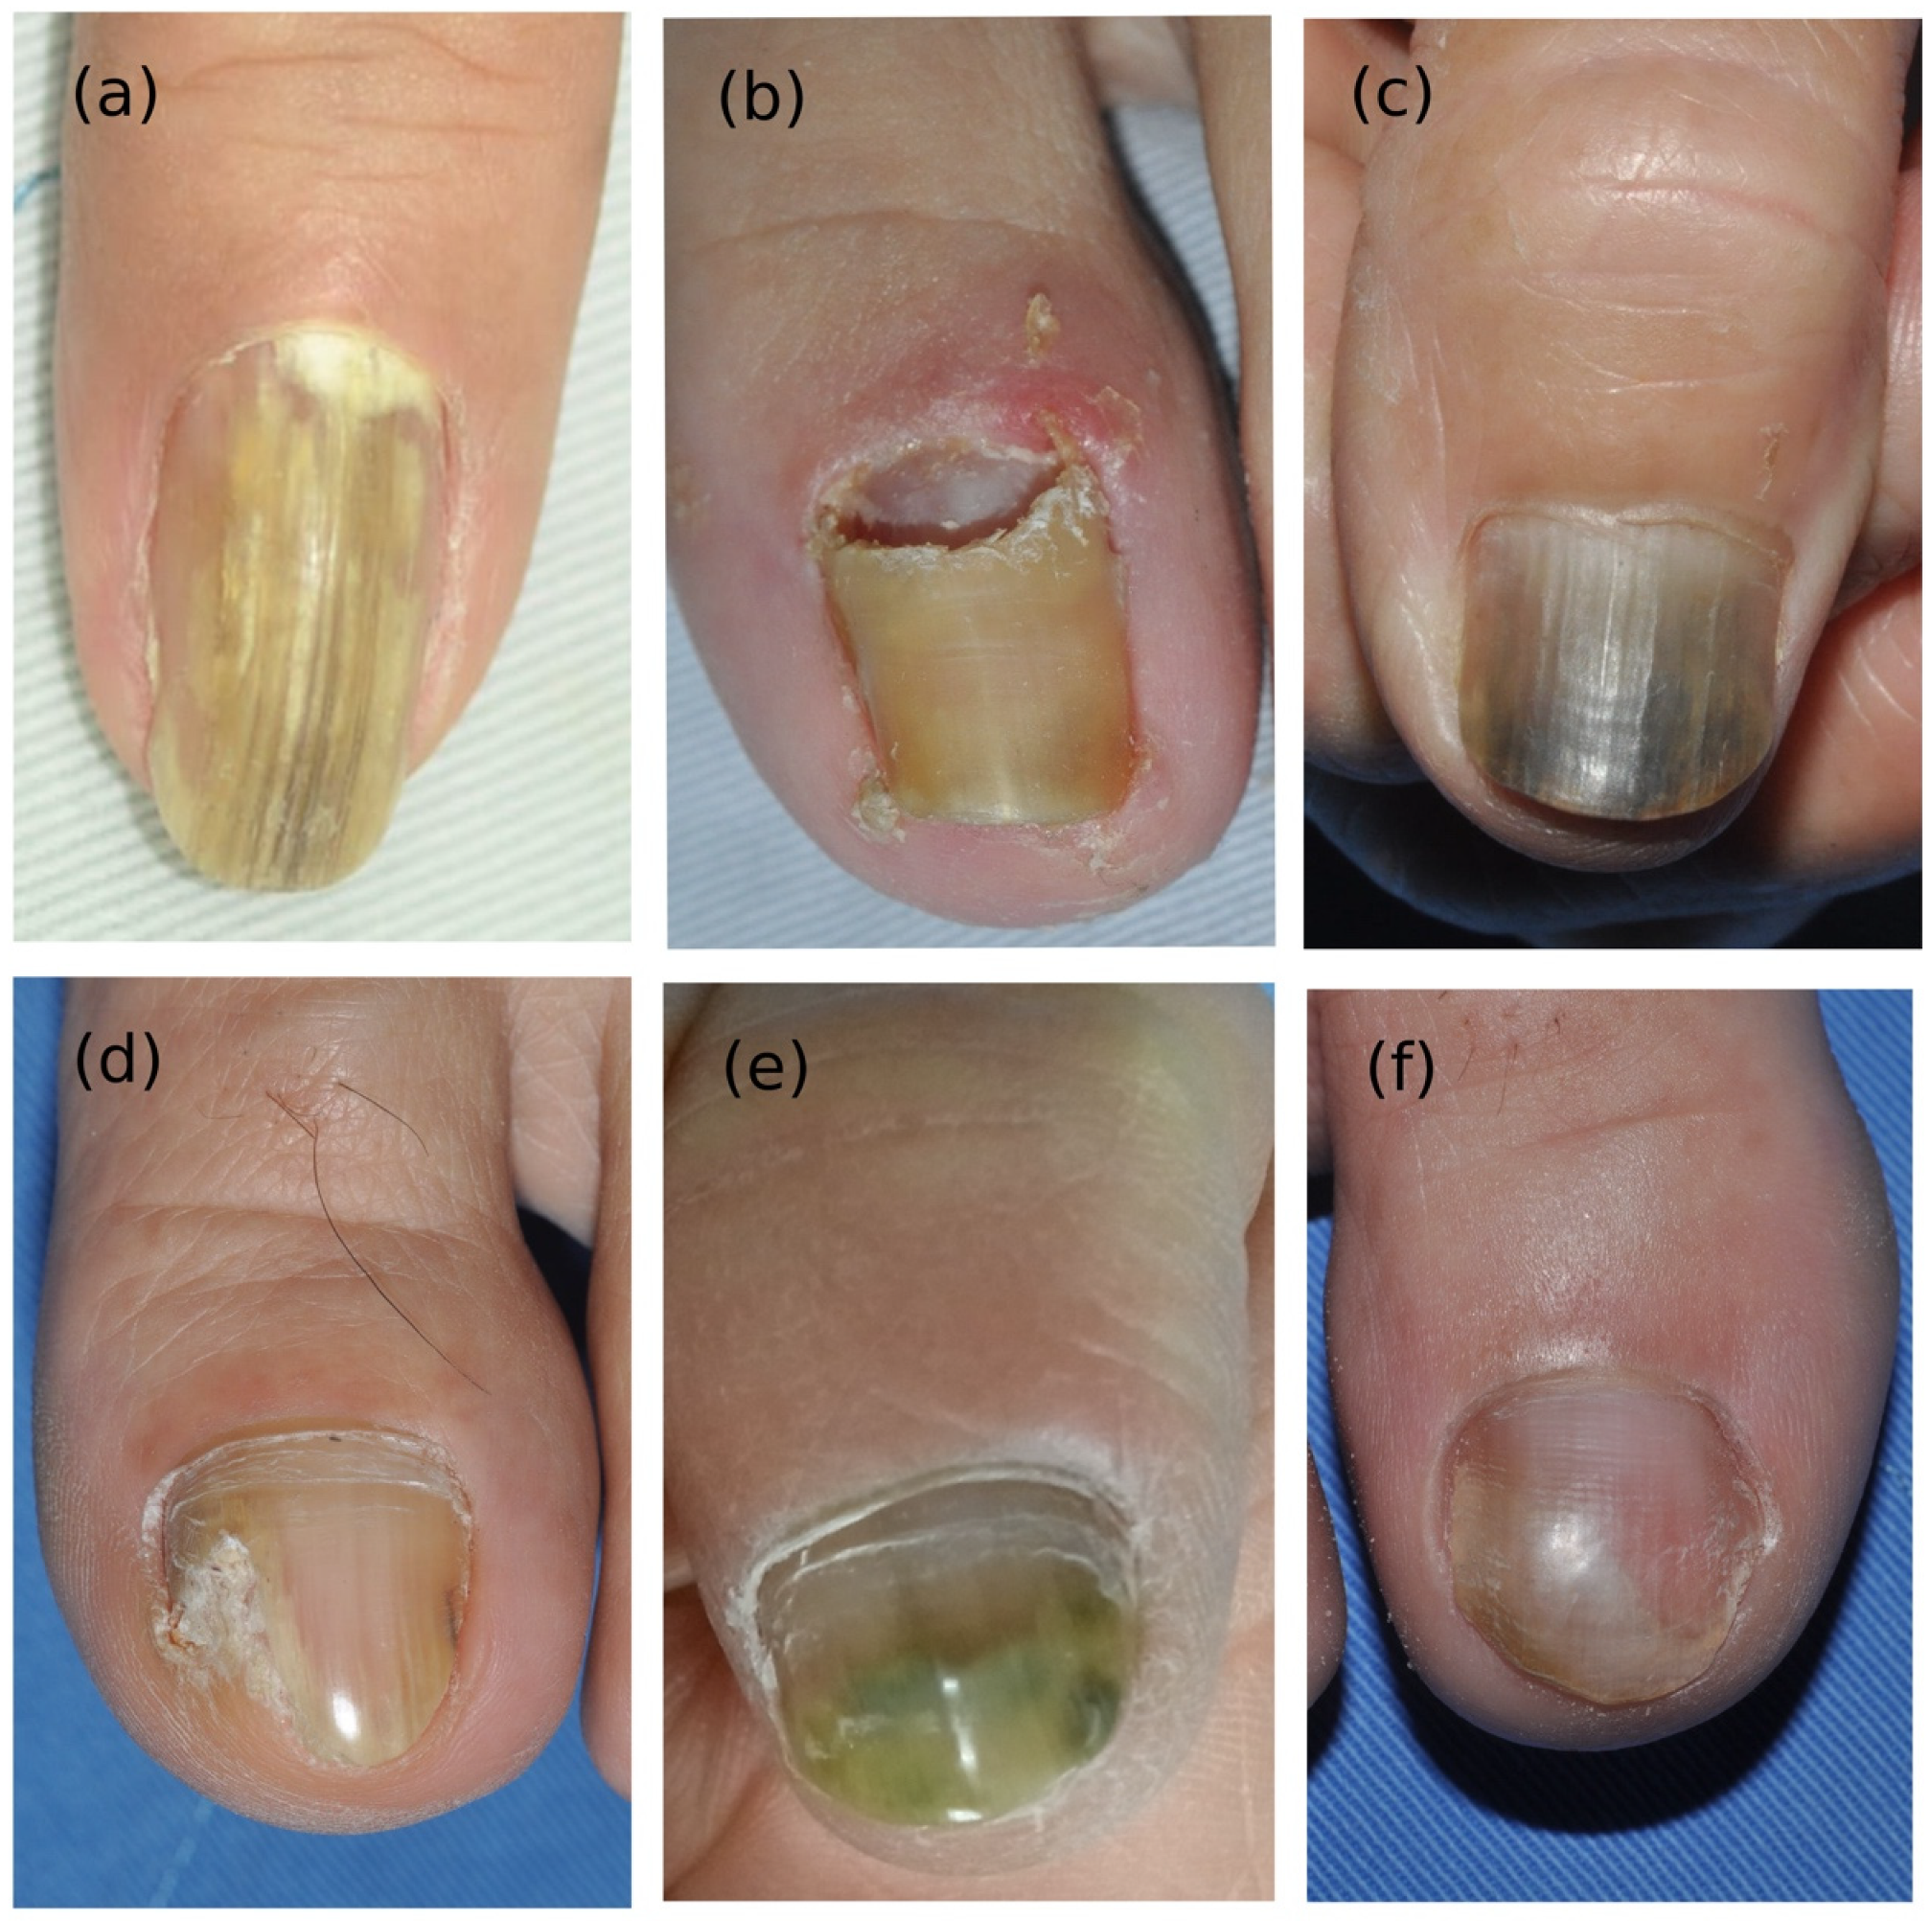 Nail Mold Vs Fungus: Know The Difference & Treatment Options